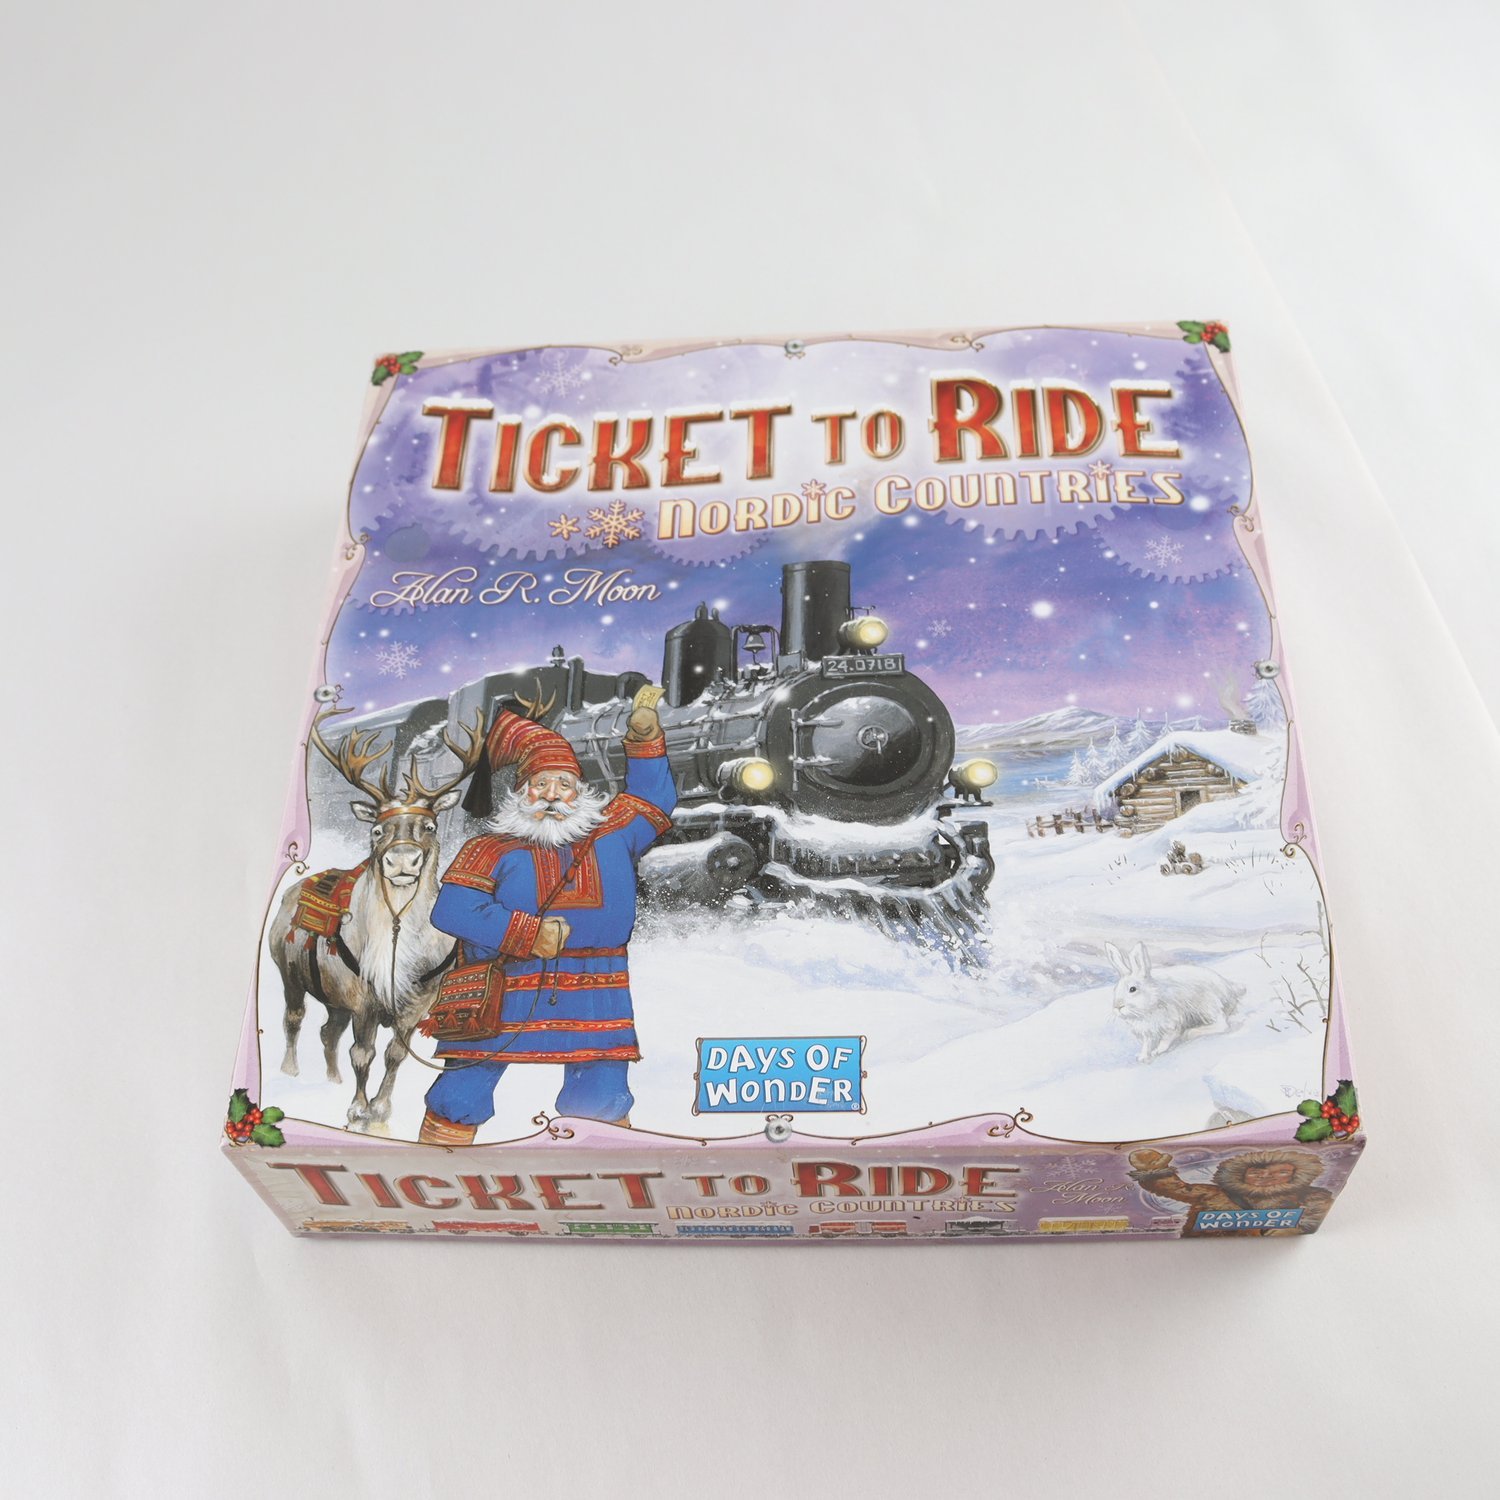 Spel, Ticket to ride, nordic countries, days of wonder.